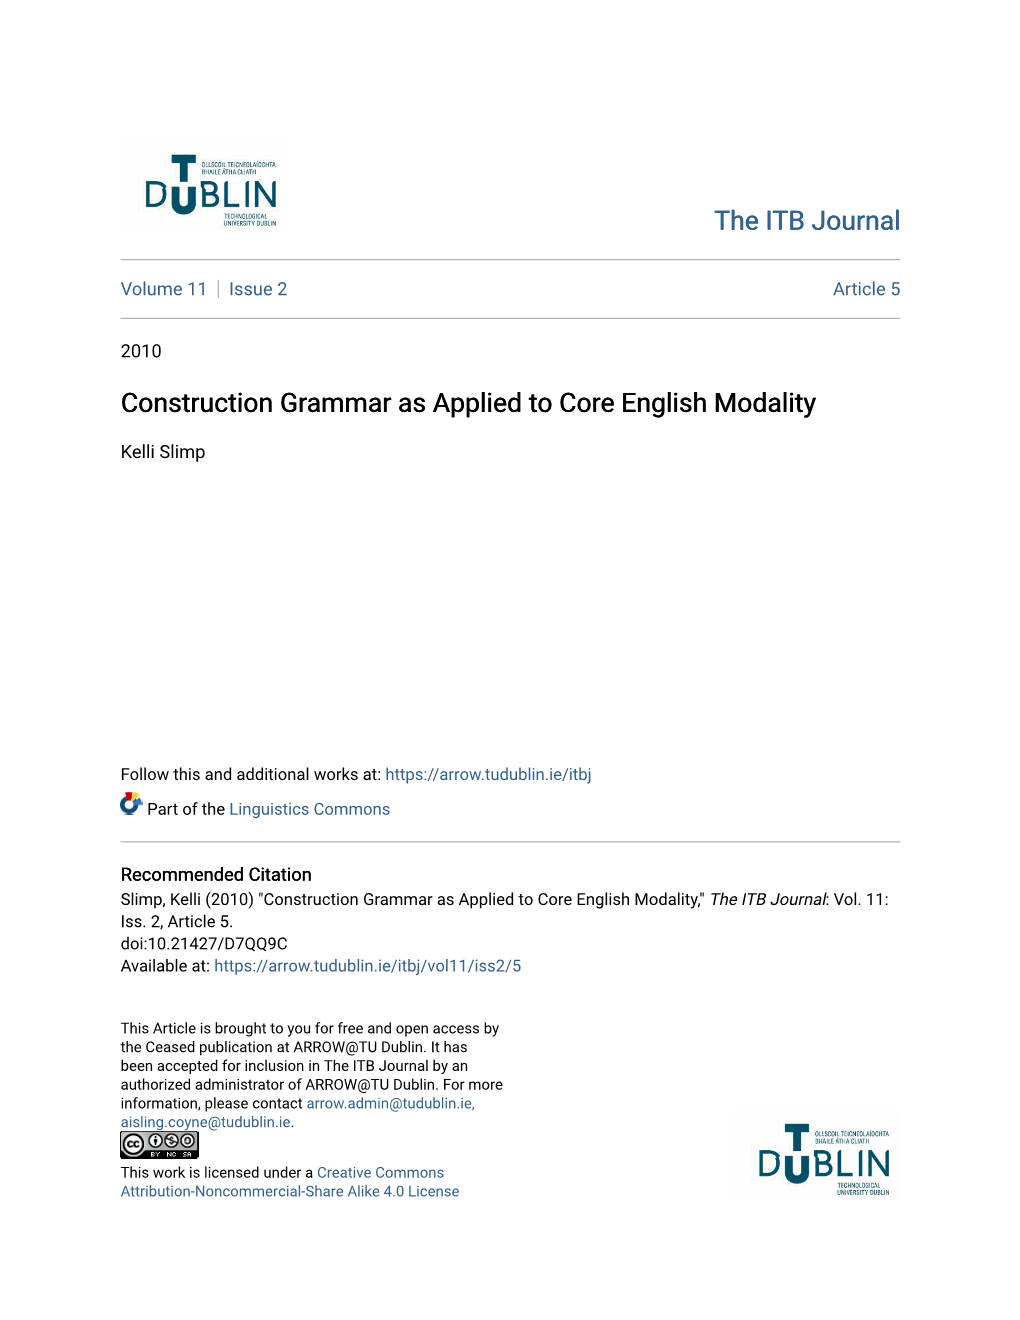 Construction Grammar As Applied to Core English Modality